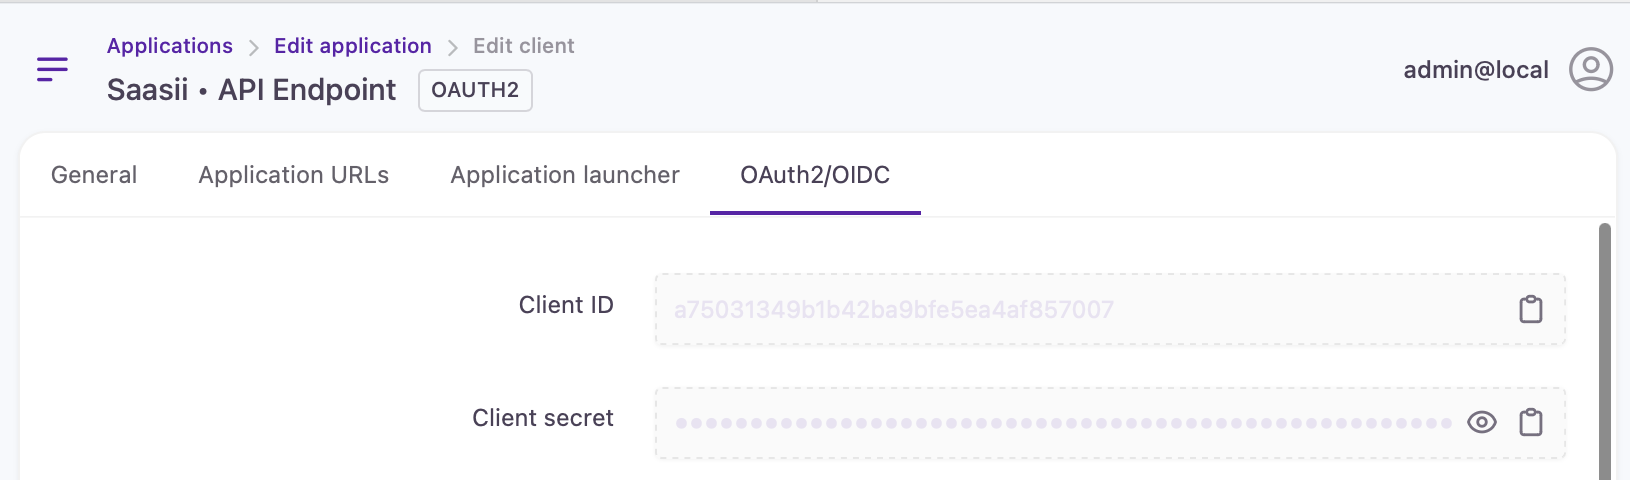 OAuth2/OIDC